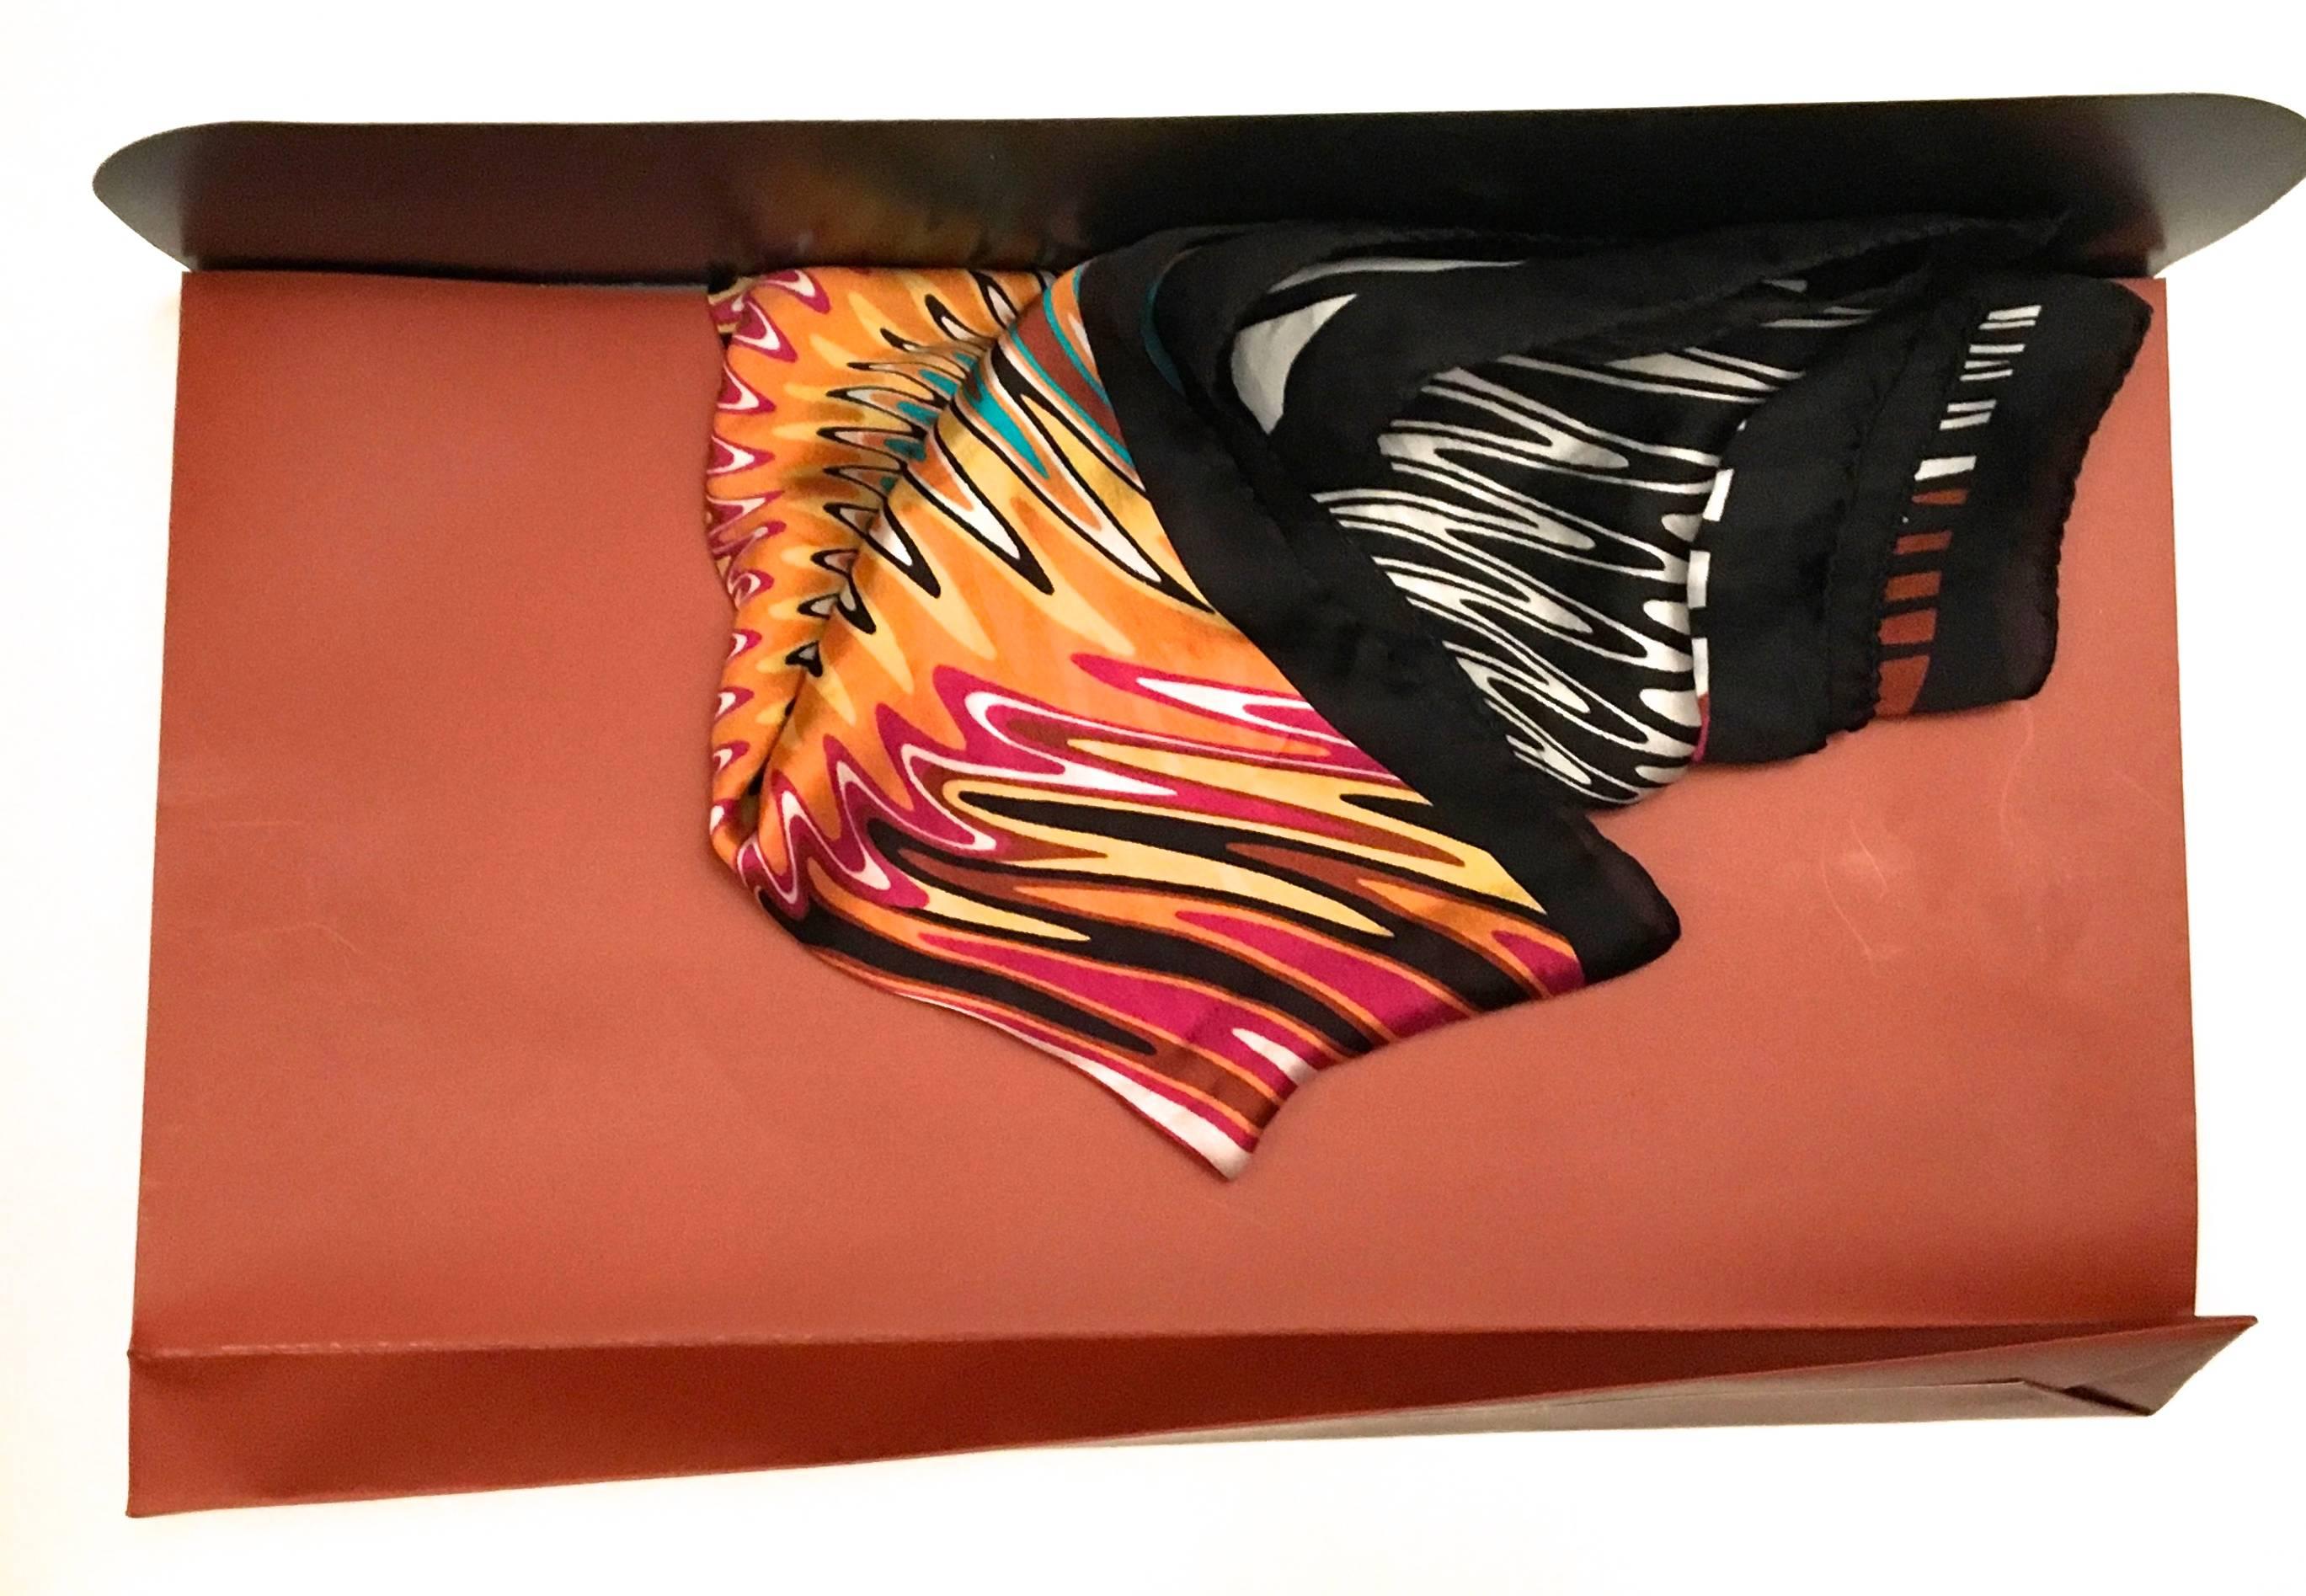 Presented here is a beautiful Missoni brown label scar. That measures 34 x 34 inches and 90 x 90 cm. The beautiful scarf is typical of a Missoni pattern with magnificent hues in vibrant electric blue with orange, raspberry, magenta, yellow and